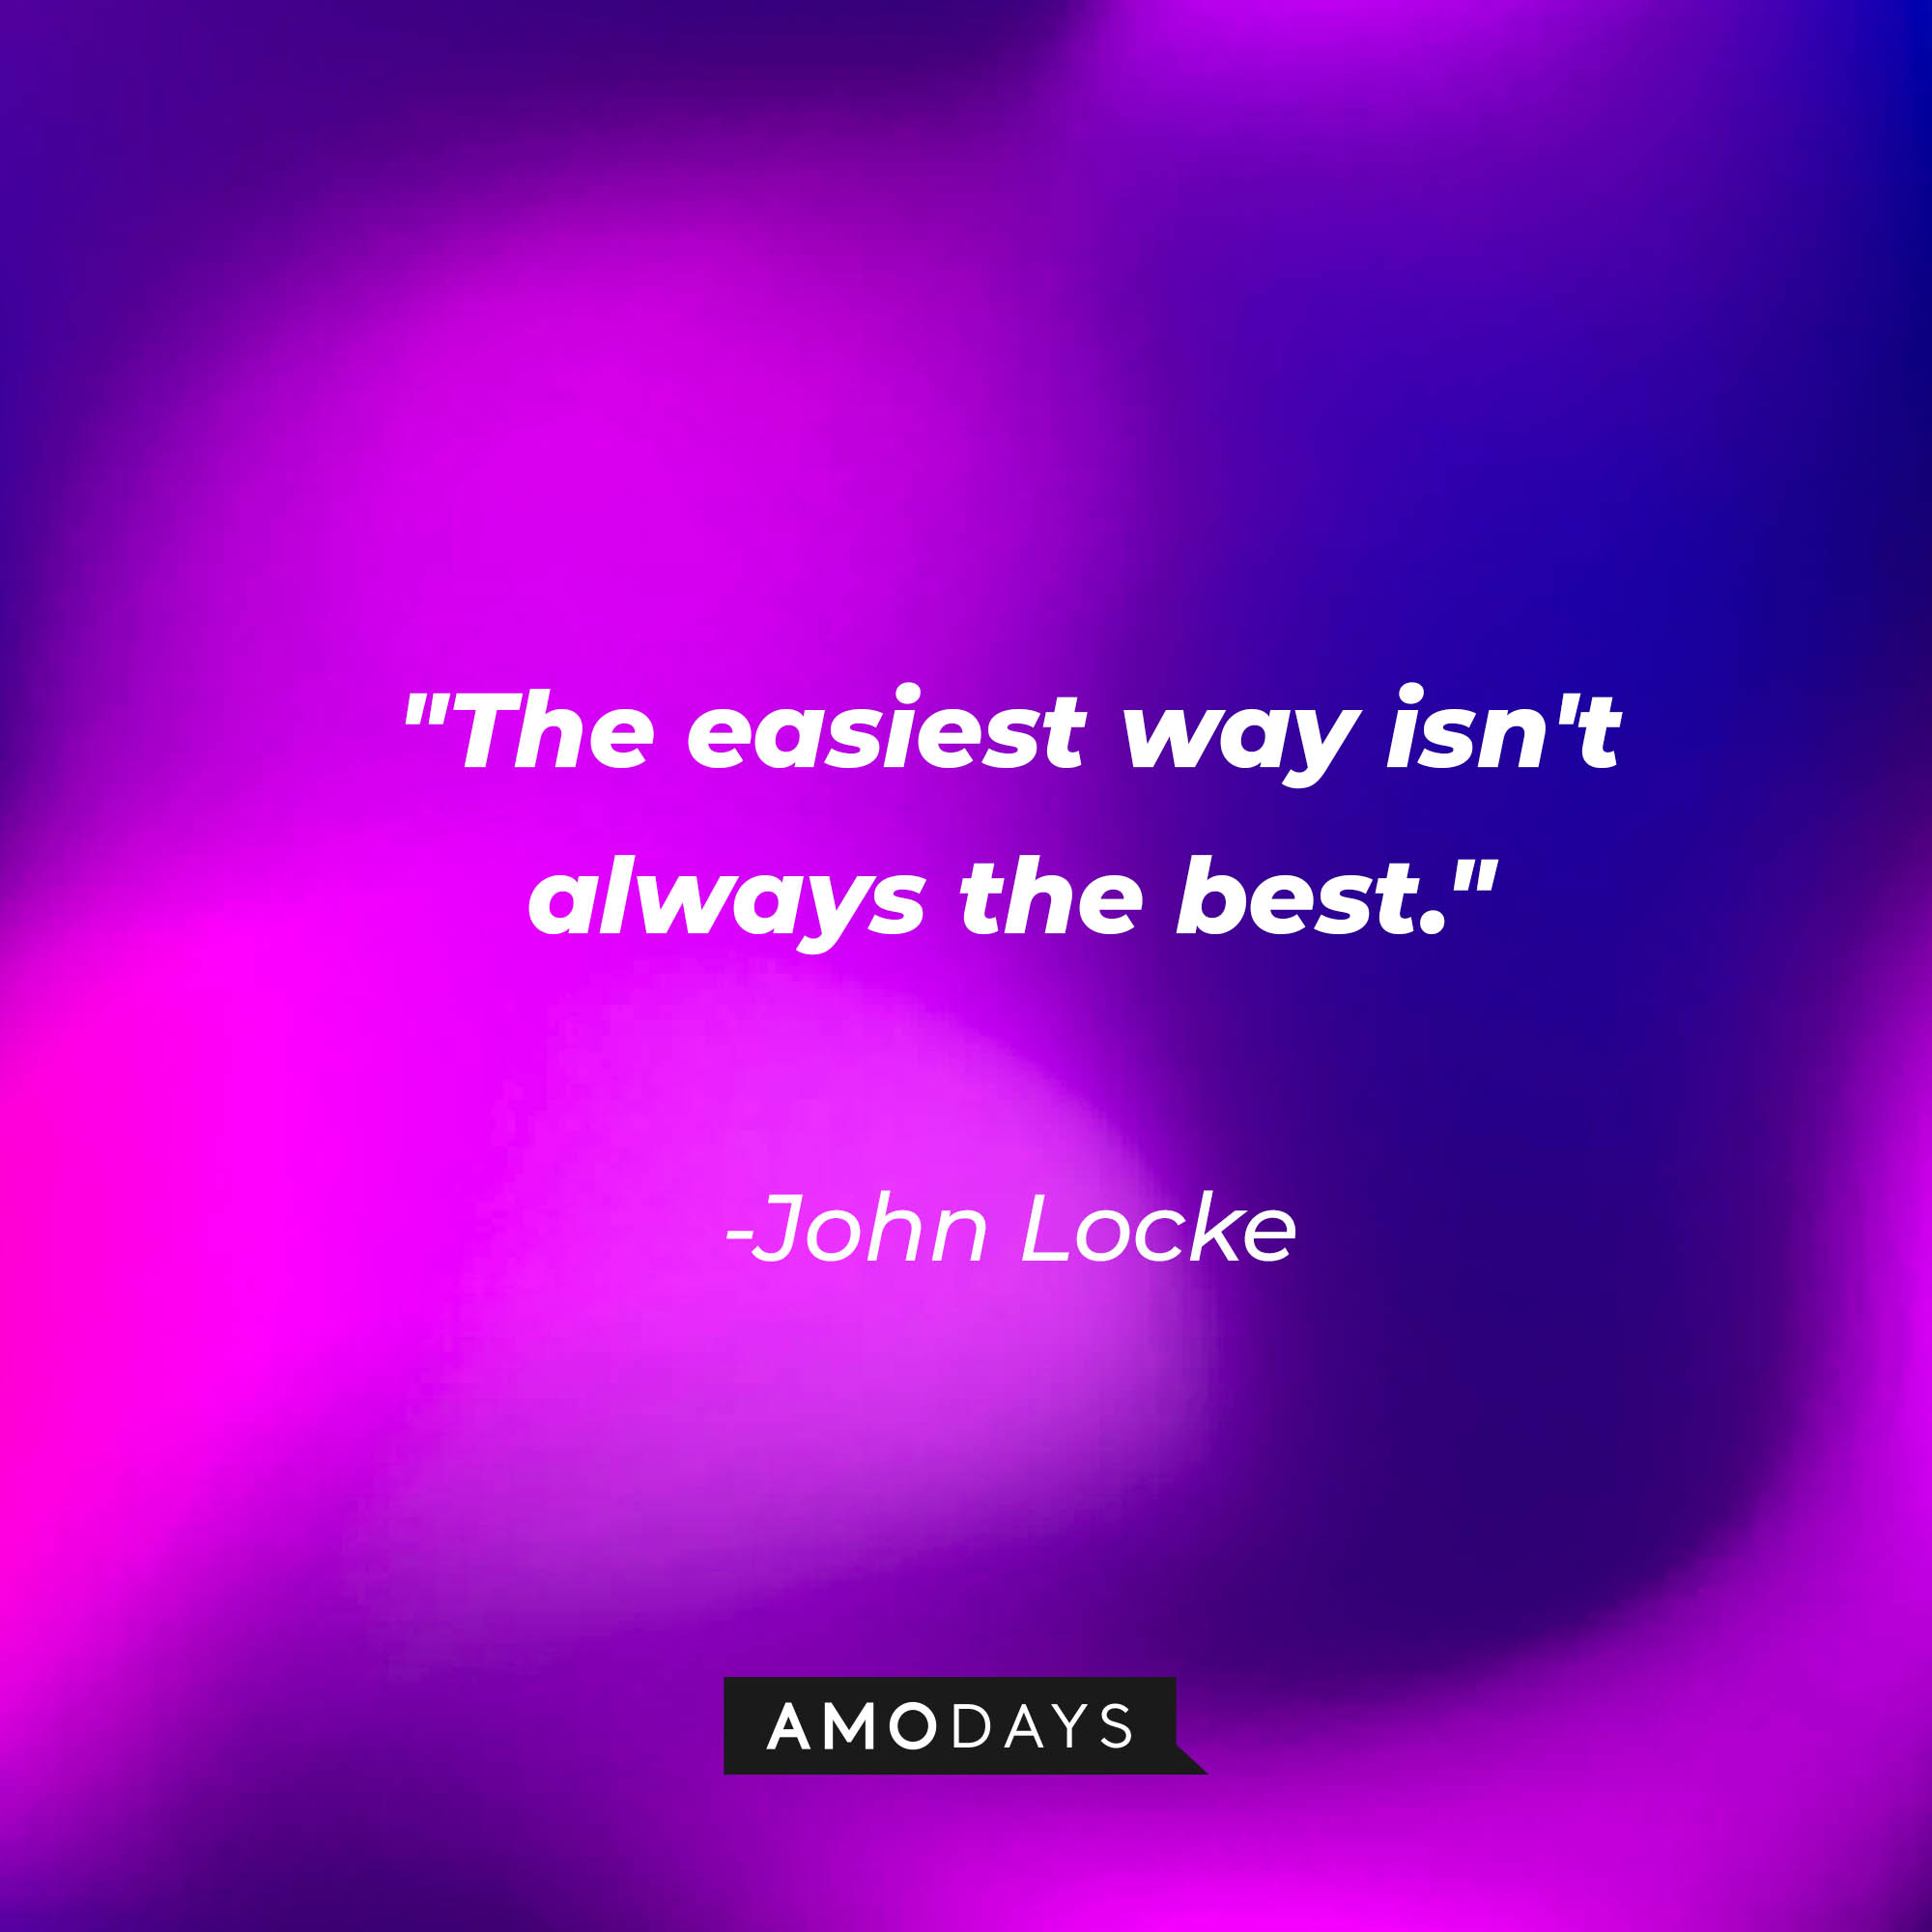 John Locke's quote: "The easiest way isn't always the best." | Source: AmoDays